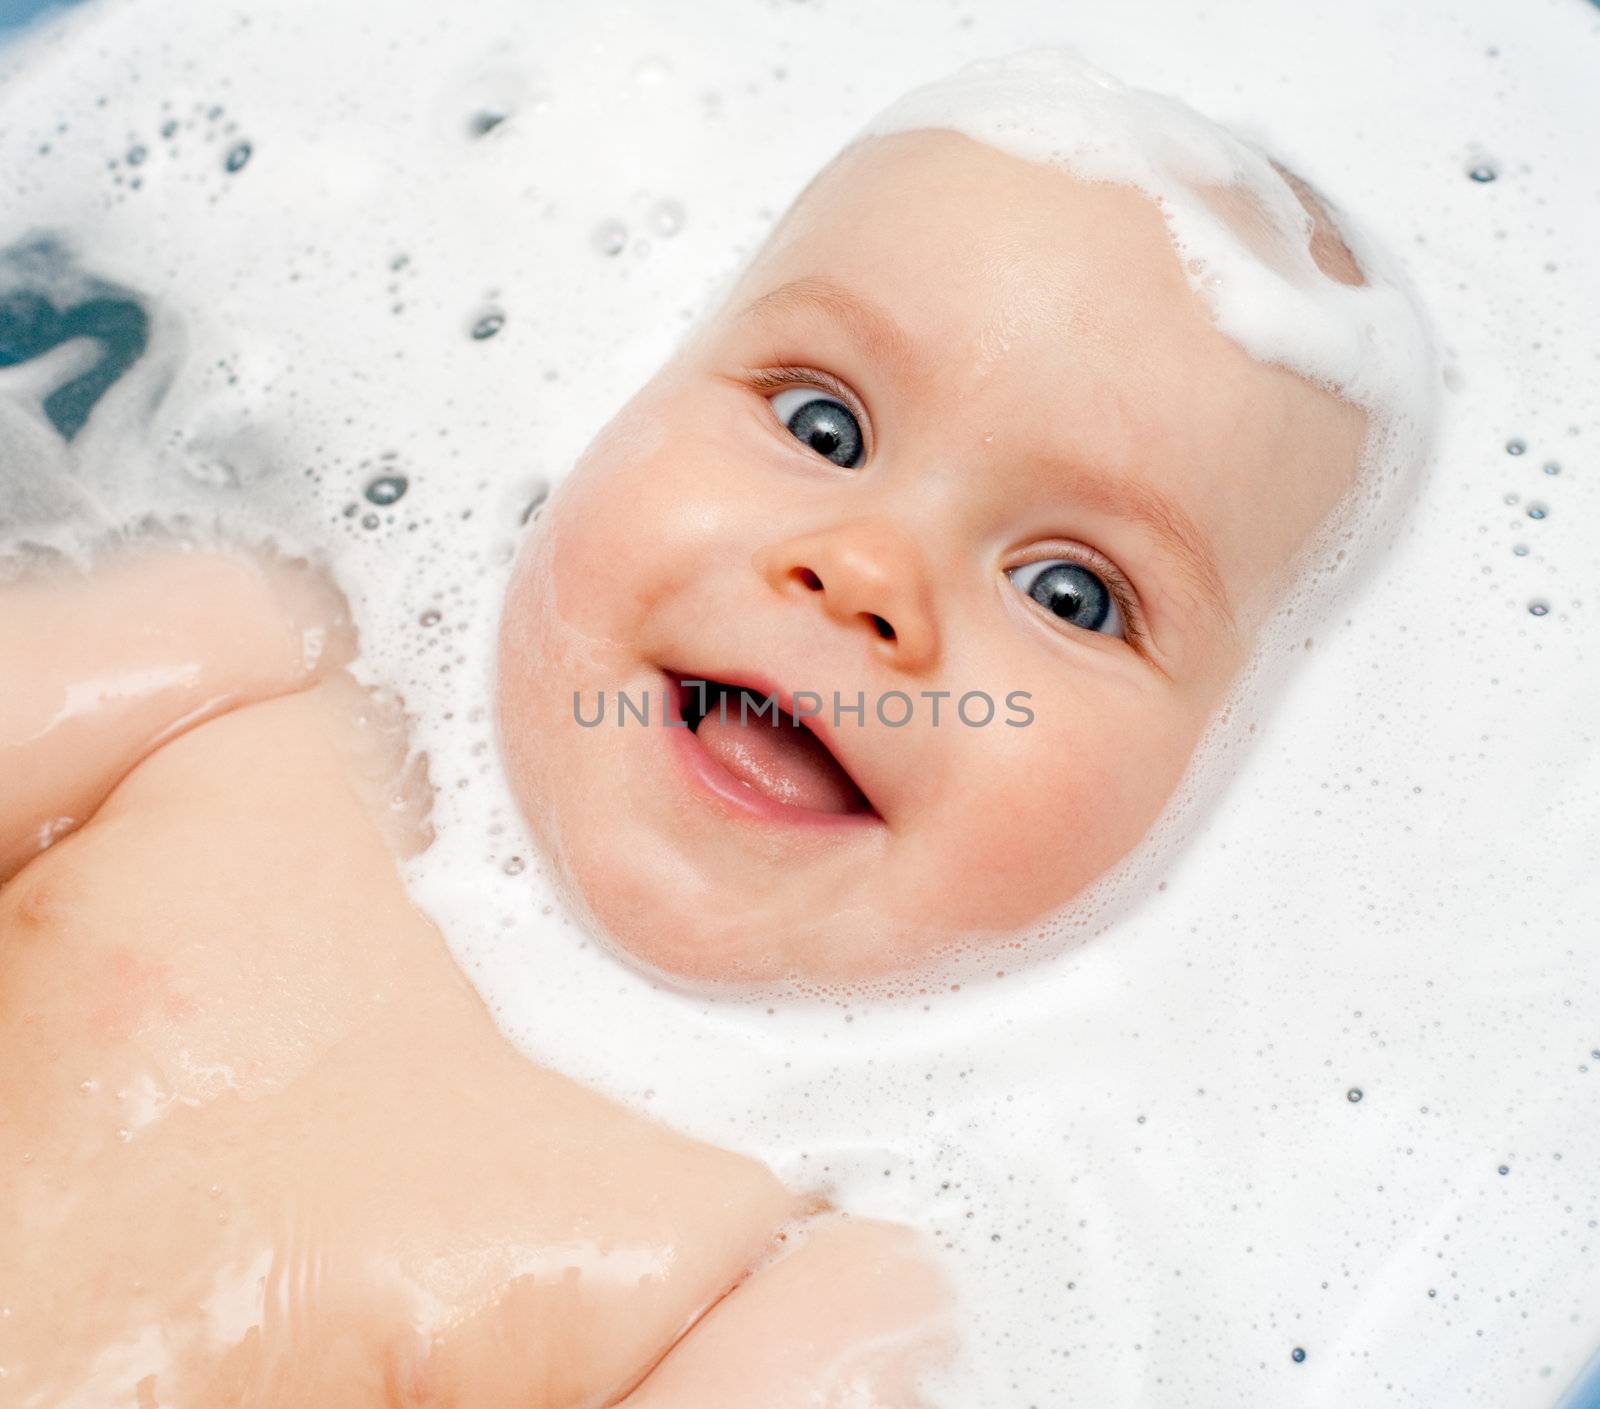 Little baby girl bathing in soapsuds